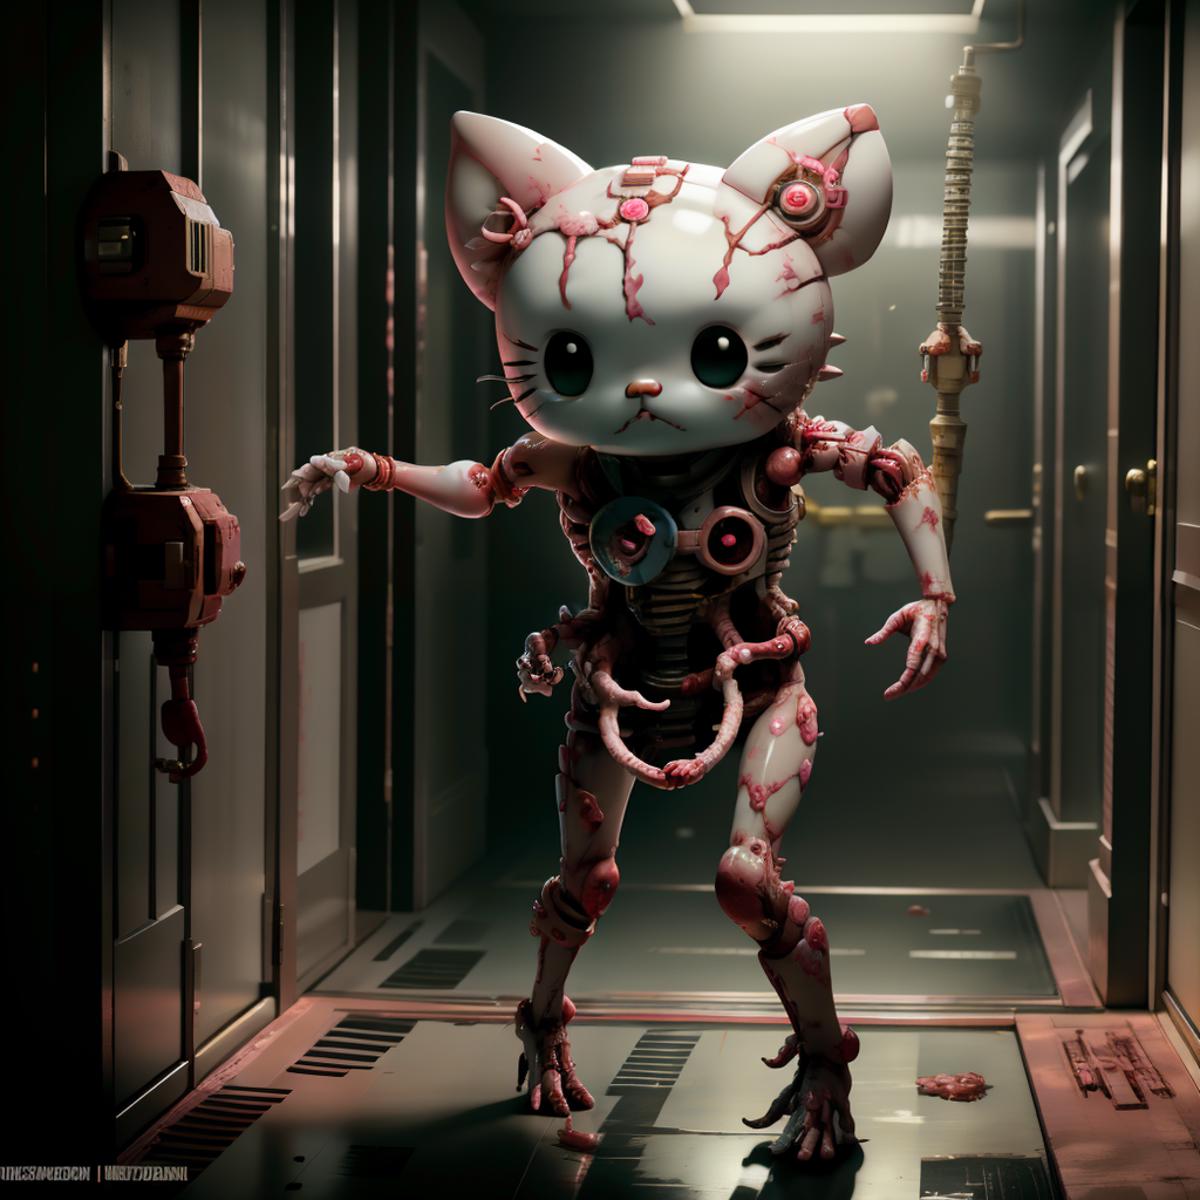 A severed kitten head attached to a body with a chain, standing in a dark hallway.